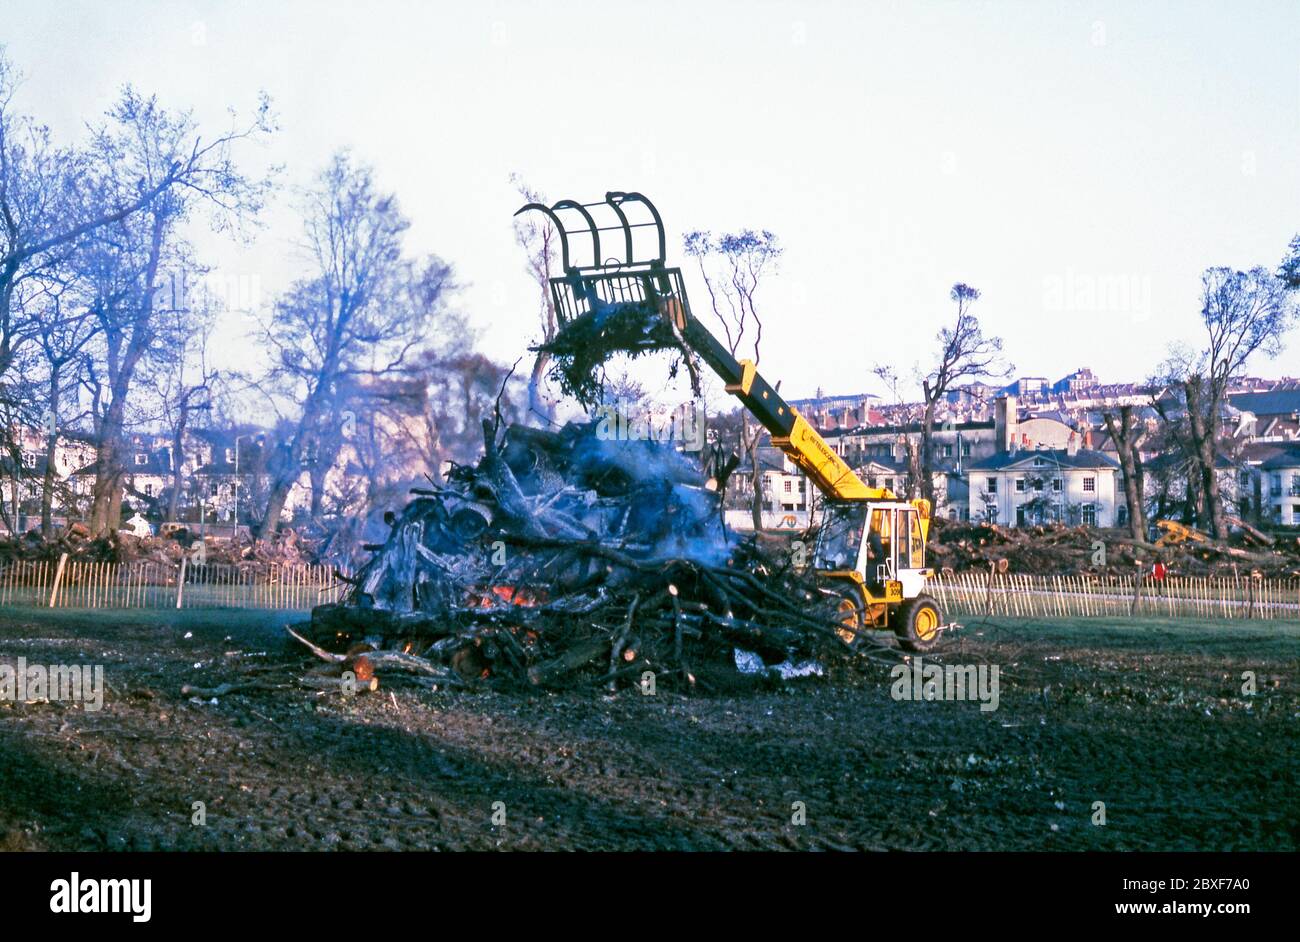 The aftermath of 'The Great Storm' in Brighton, East Sussex, England, UK – it occurred on the night of 15/16 October 1987. Here the big clean up is happening on 'The Level', an urban park in central Brighton. A JCB piles timber and debris on to a large bonfire on 'The Level', an urban park in central Brighton. 'The Great Storm' of 1987 was a violent tropical cyclone, with hurricane-force winds causing casualties and great damage in the UK and France. Stock Photo